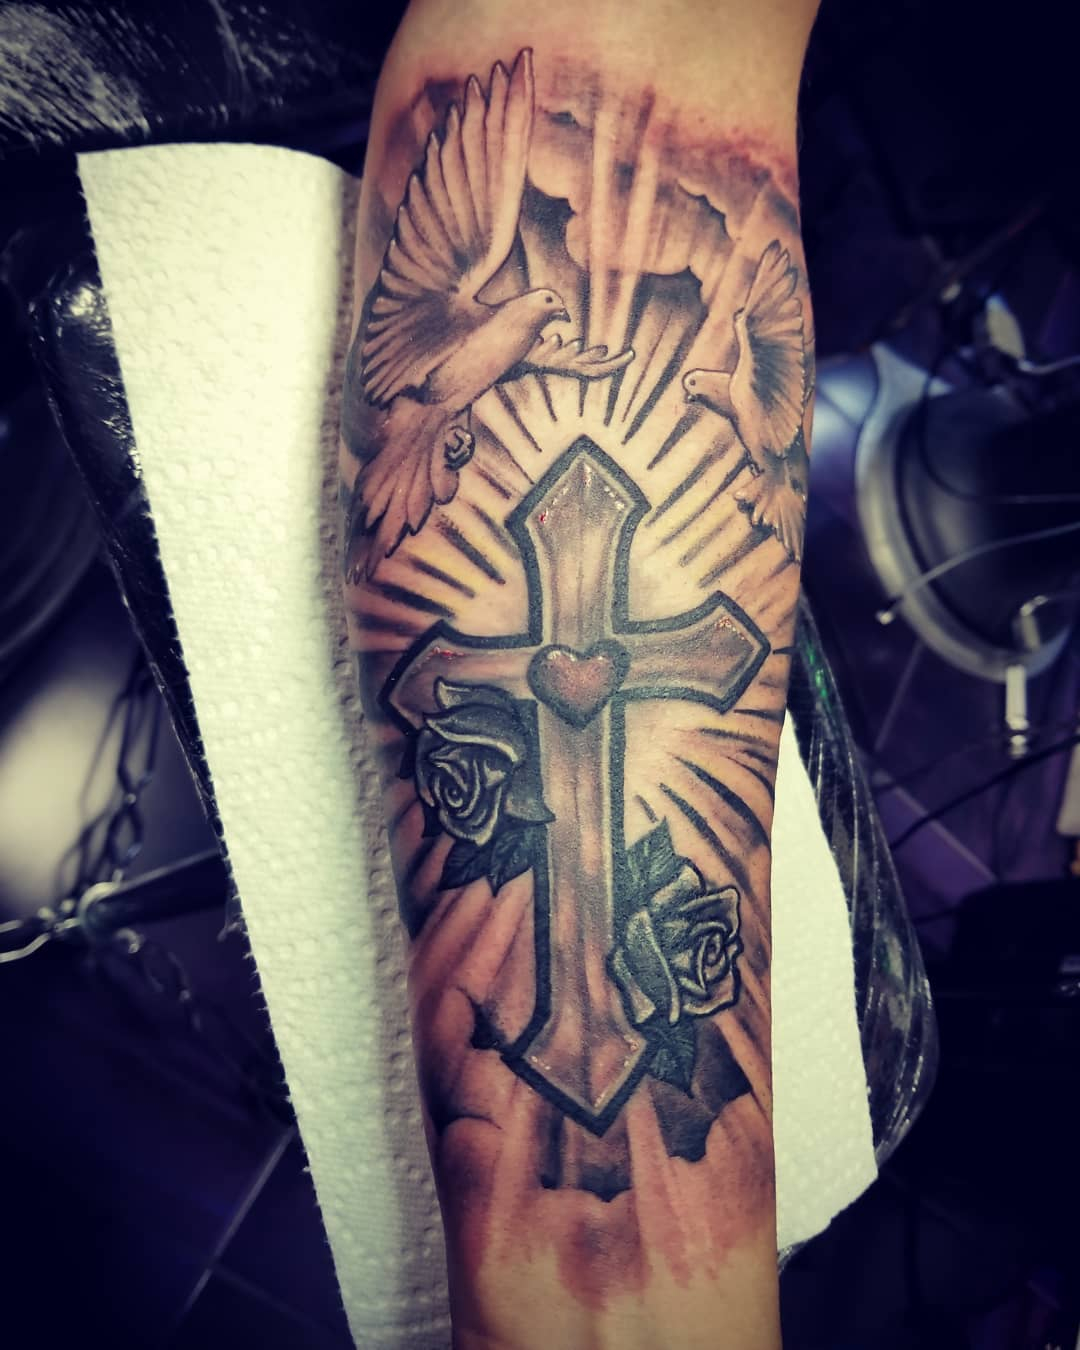 225 Best Cross Tattoo Designs With Meanings for dimensions 1080 X 1350